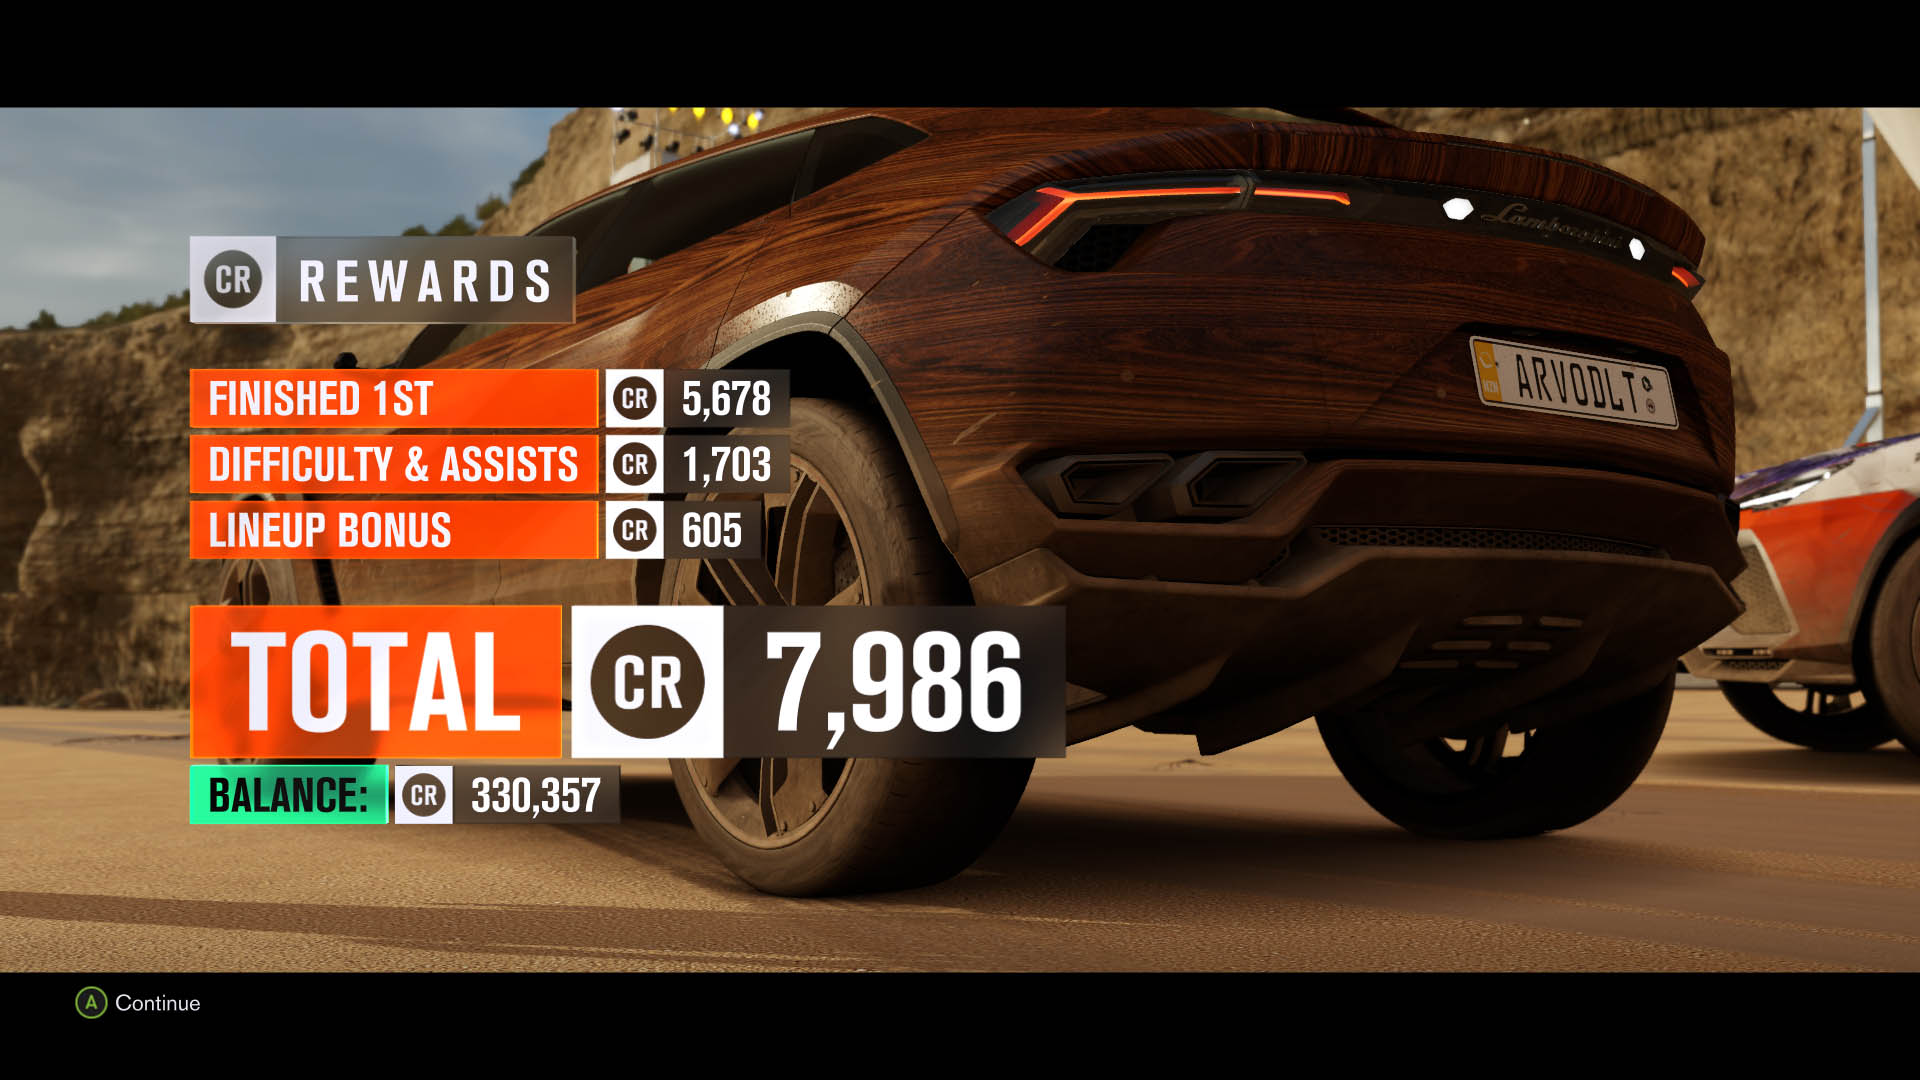 Wood grain is only improved by dirt...